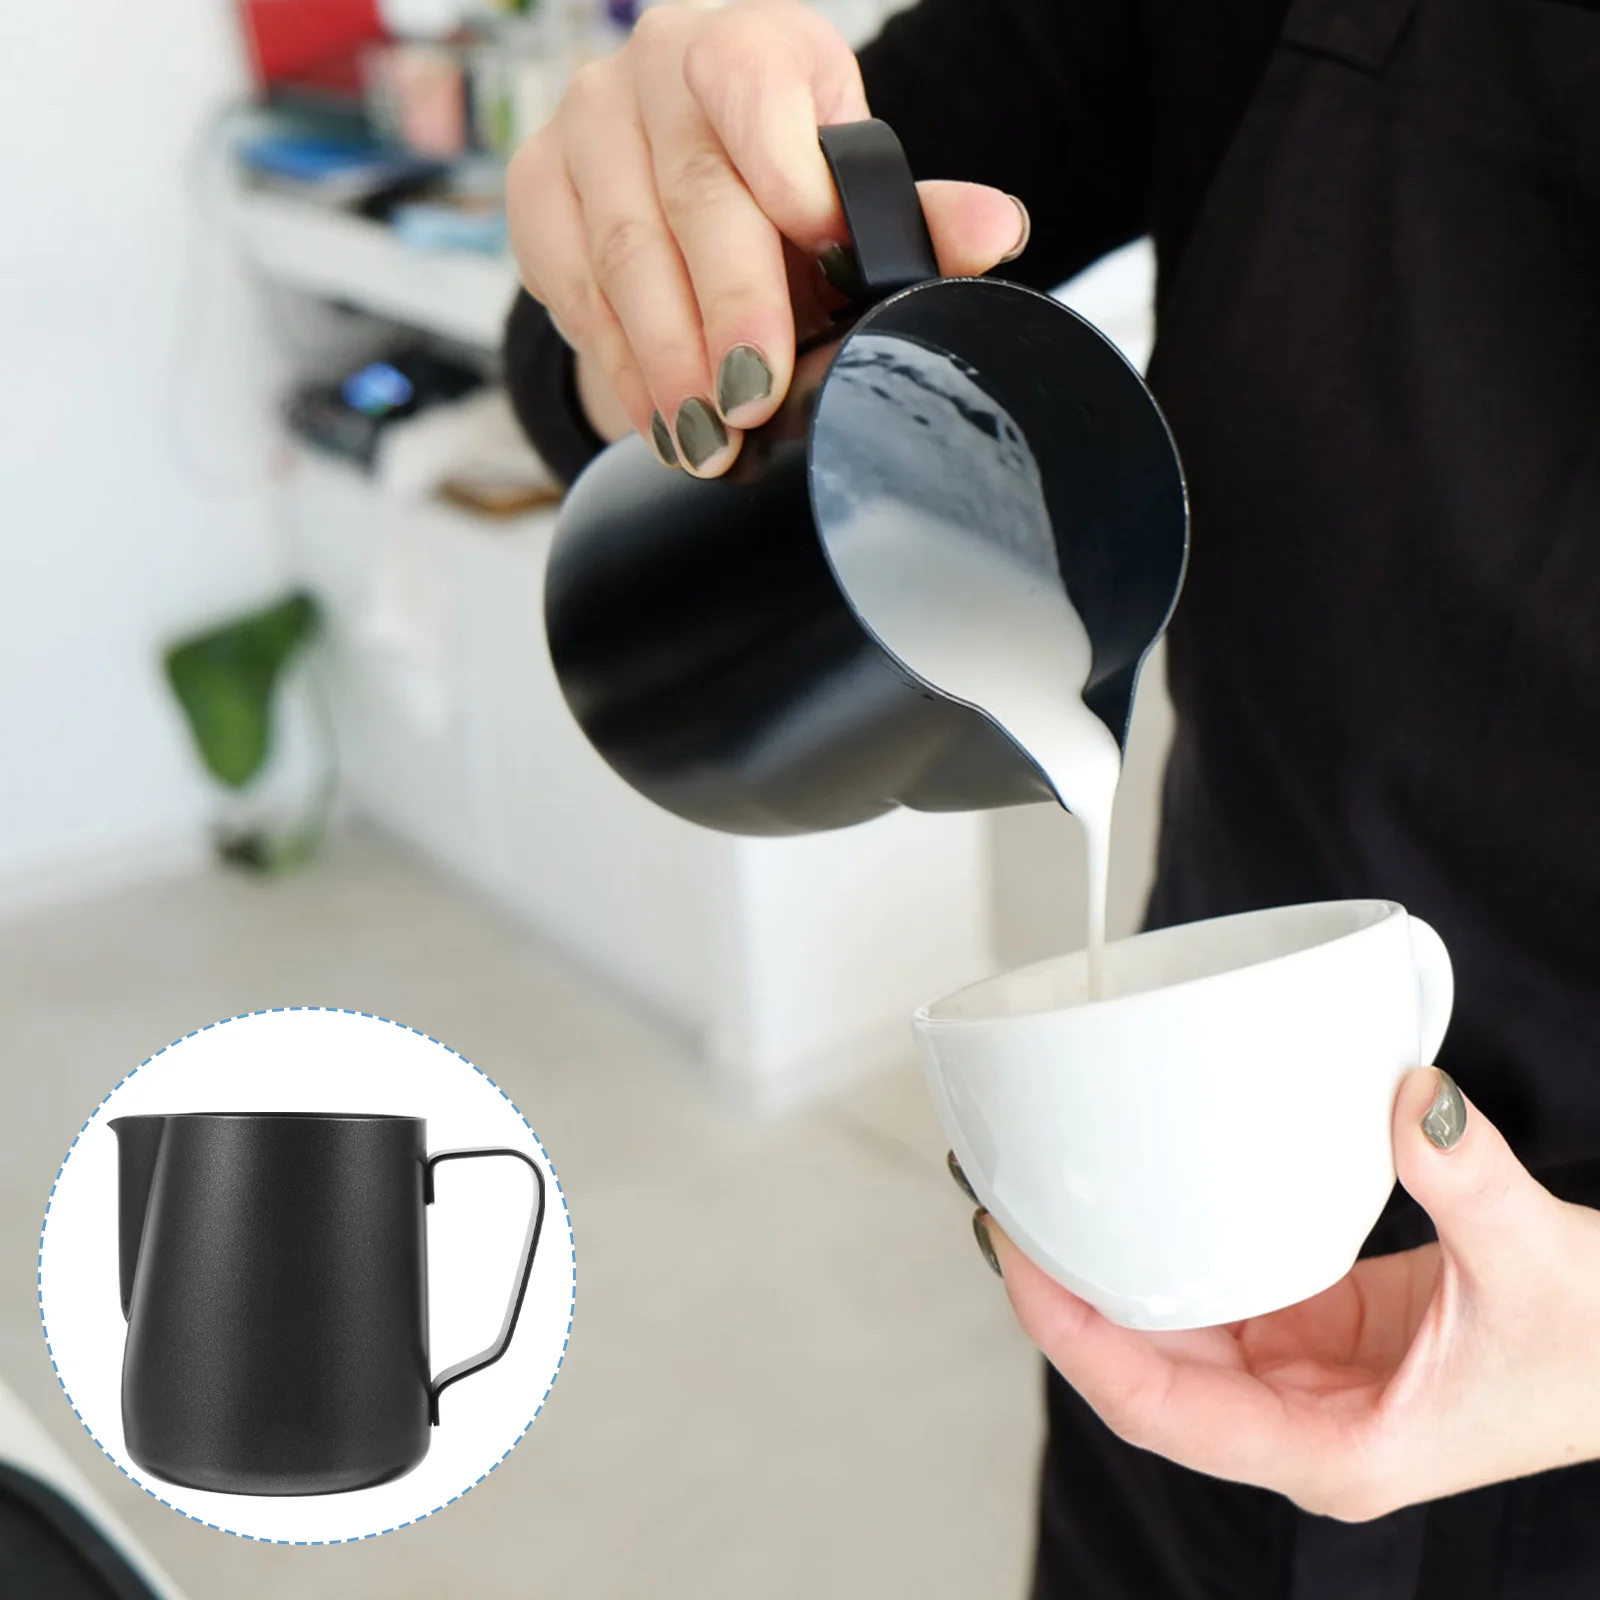 

Milk Cup Pitcher Coffee Espresso Frothing Steaming Jug Frother Latte Art Steamer Steel Barista Steam Stainless Handle Pitchers